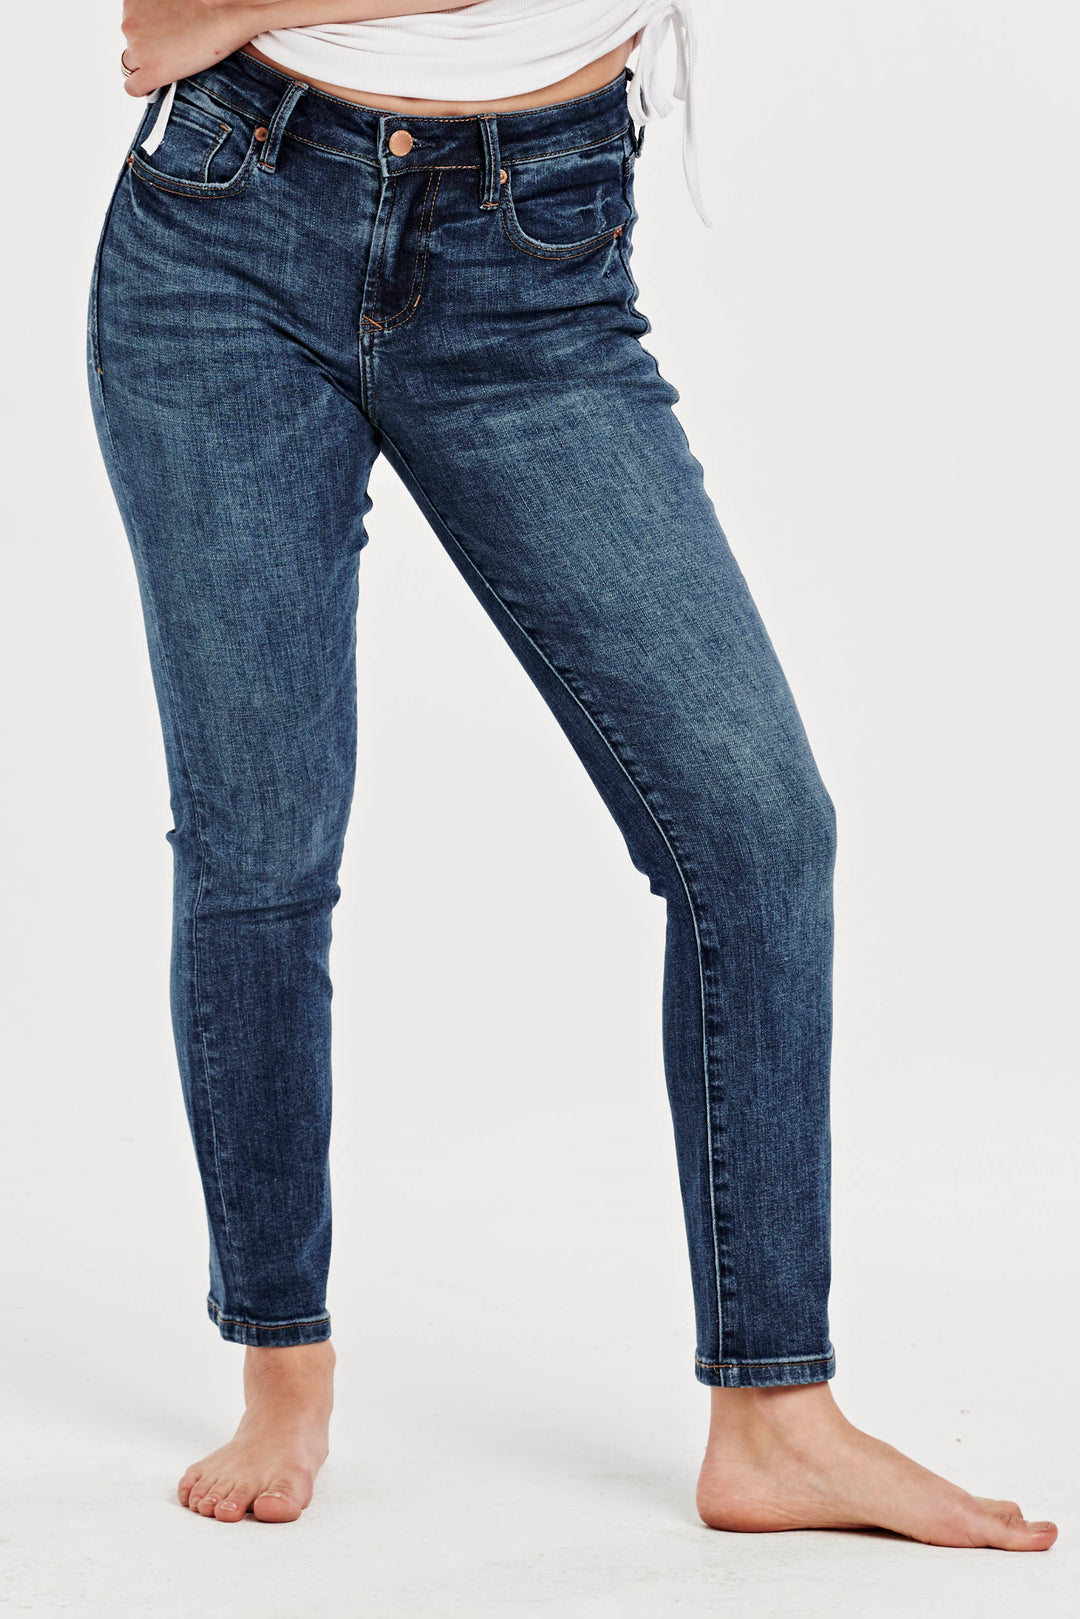 Blaire Highrise Ankle Slim Straight Jeans in Linfield by Dear John